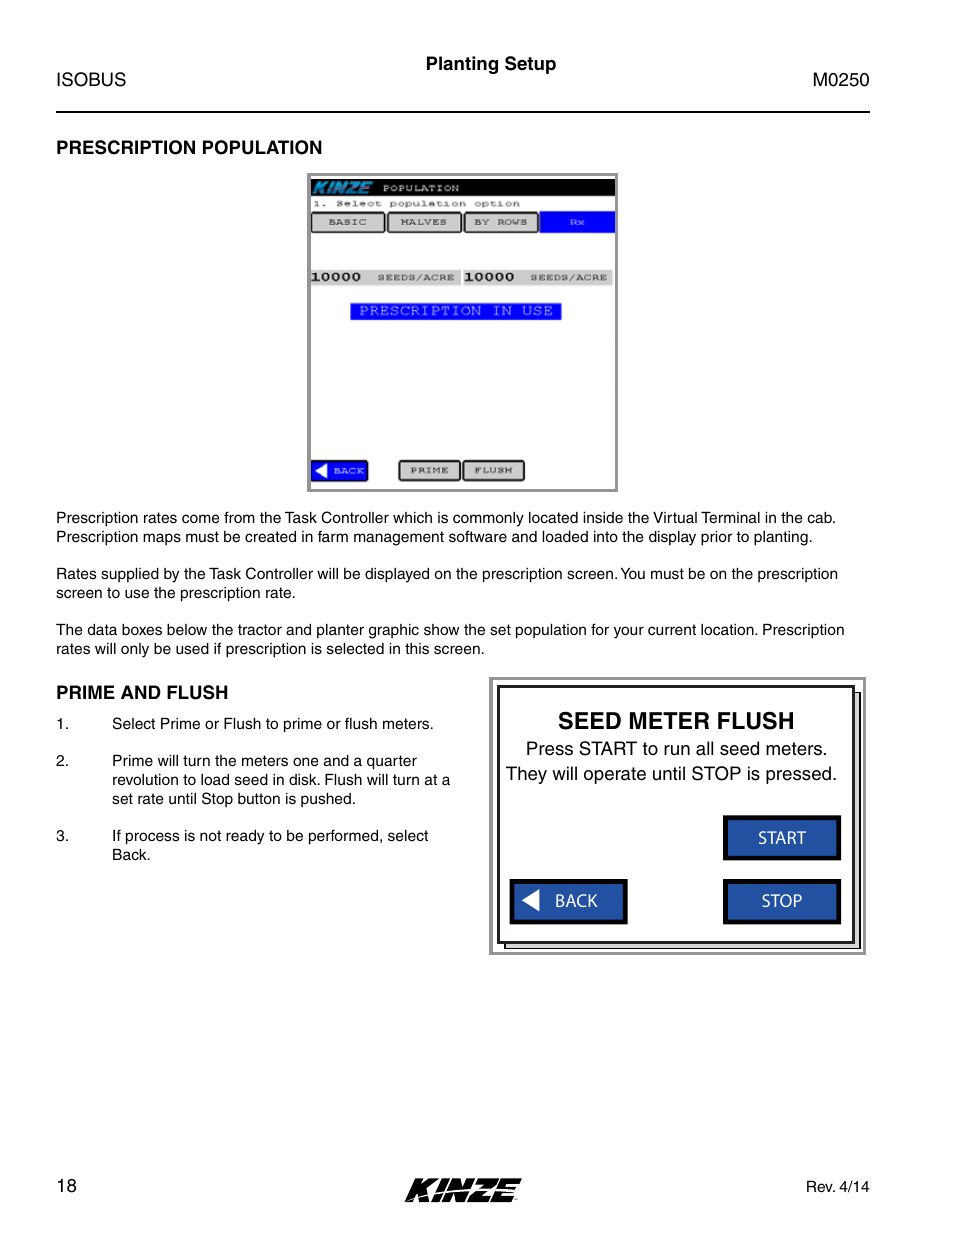 Prescription population, Prime and flush, Prescription population prime and flush | Seed meter flush | Kinze ISOBUS Electronics Package (4900) Rev. 4/14 User Manual | Page 22 / 60